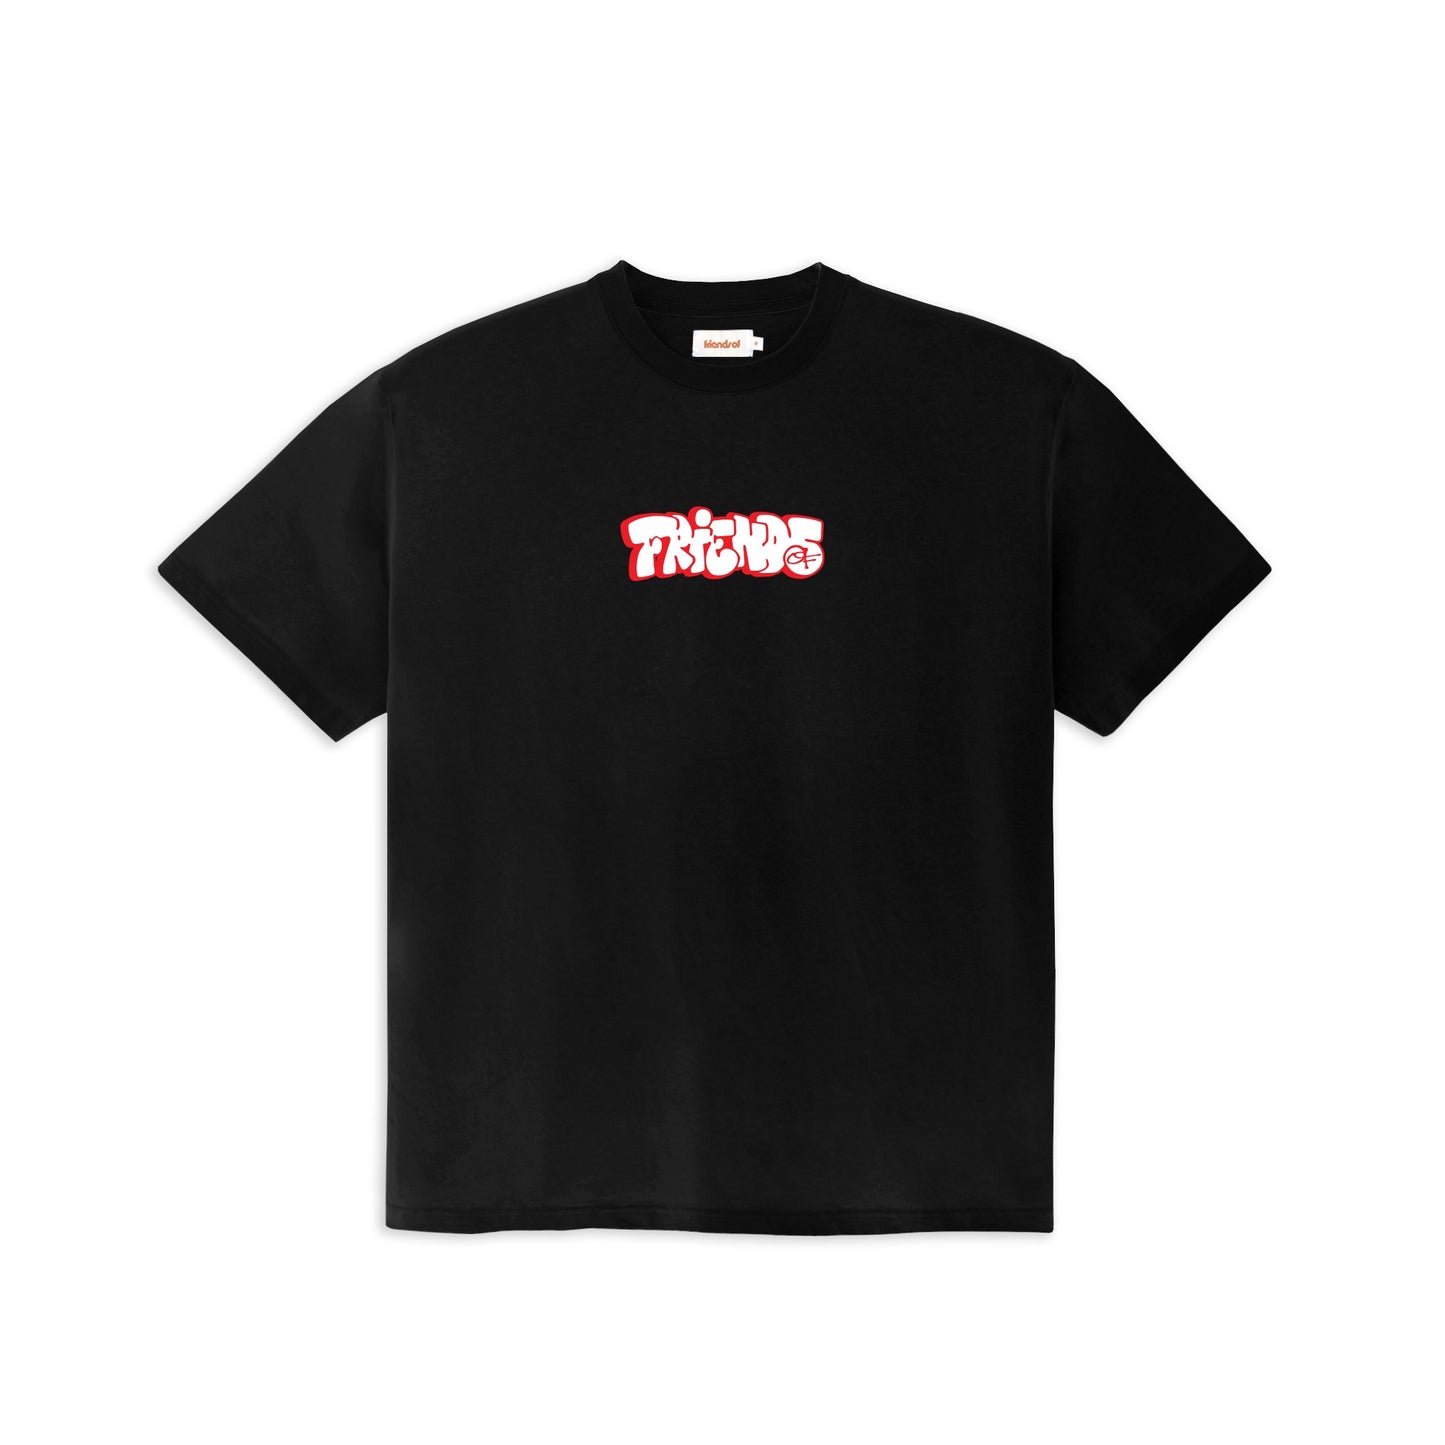 Friends Of 'Throwie' T-Shirt - Black/Red